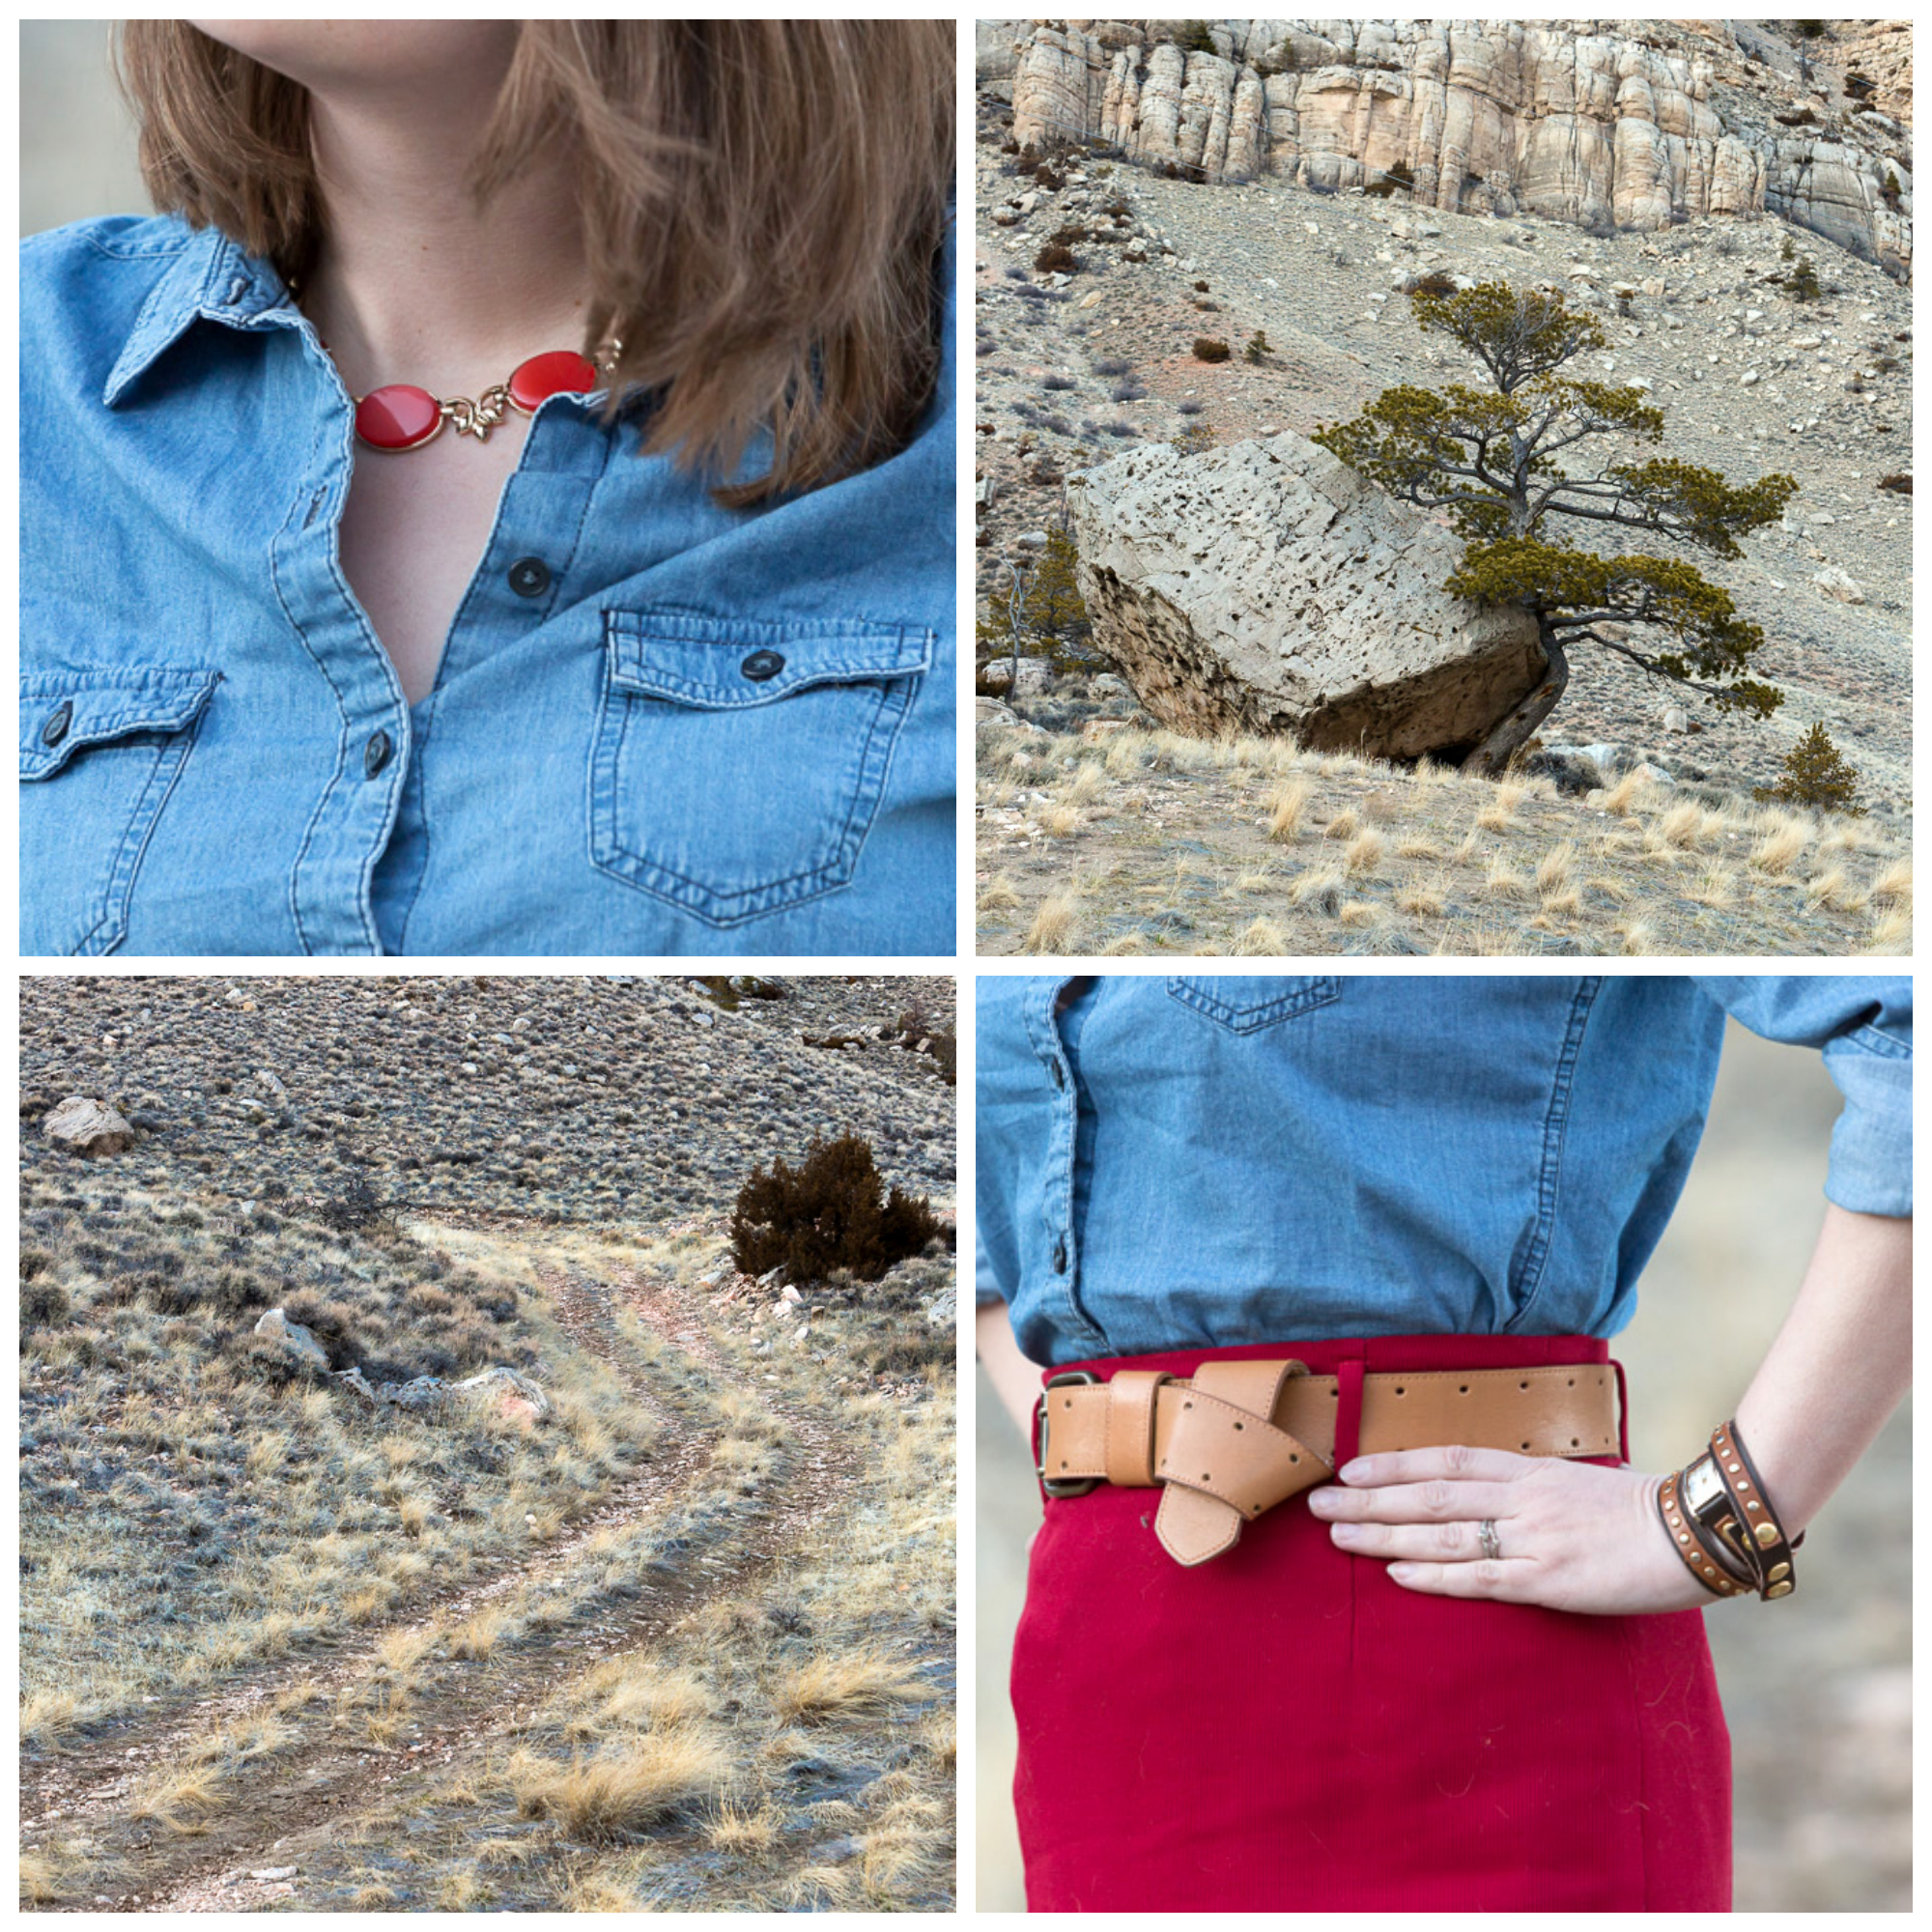 red, blue, chambray shirt, pencil skirt, wyoming, never fully dressed, withoutastyle, outfit,